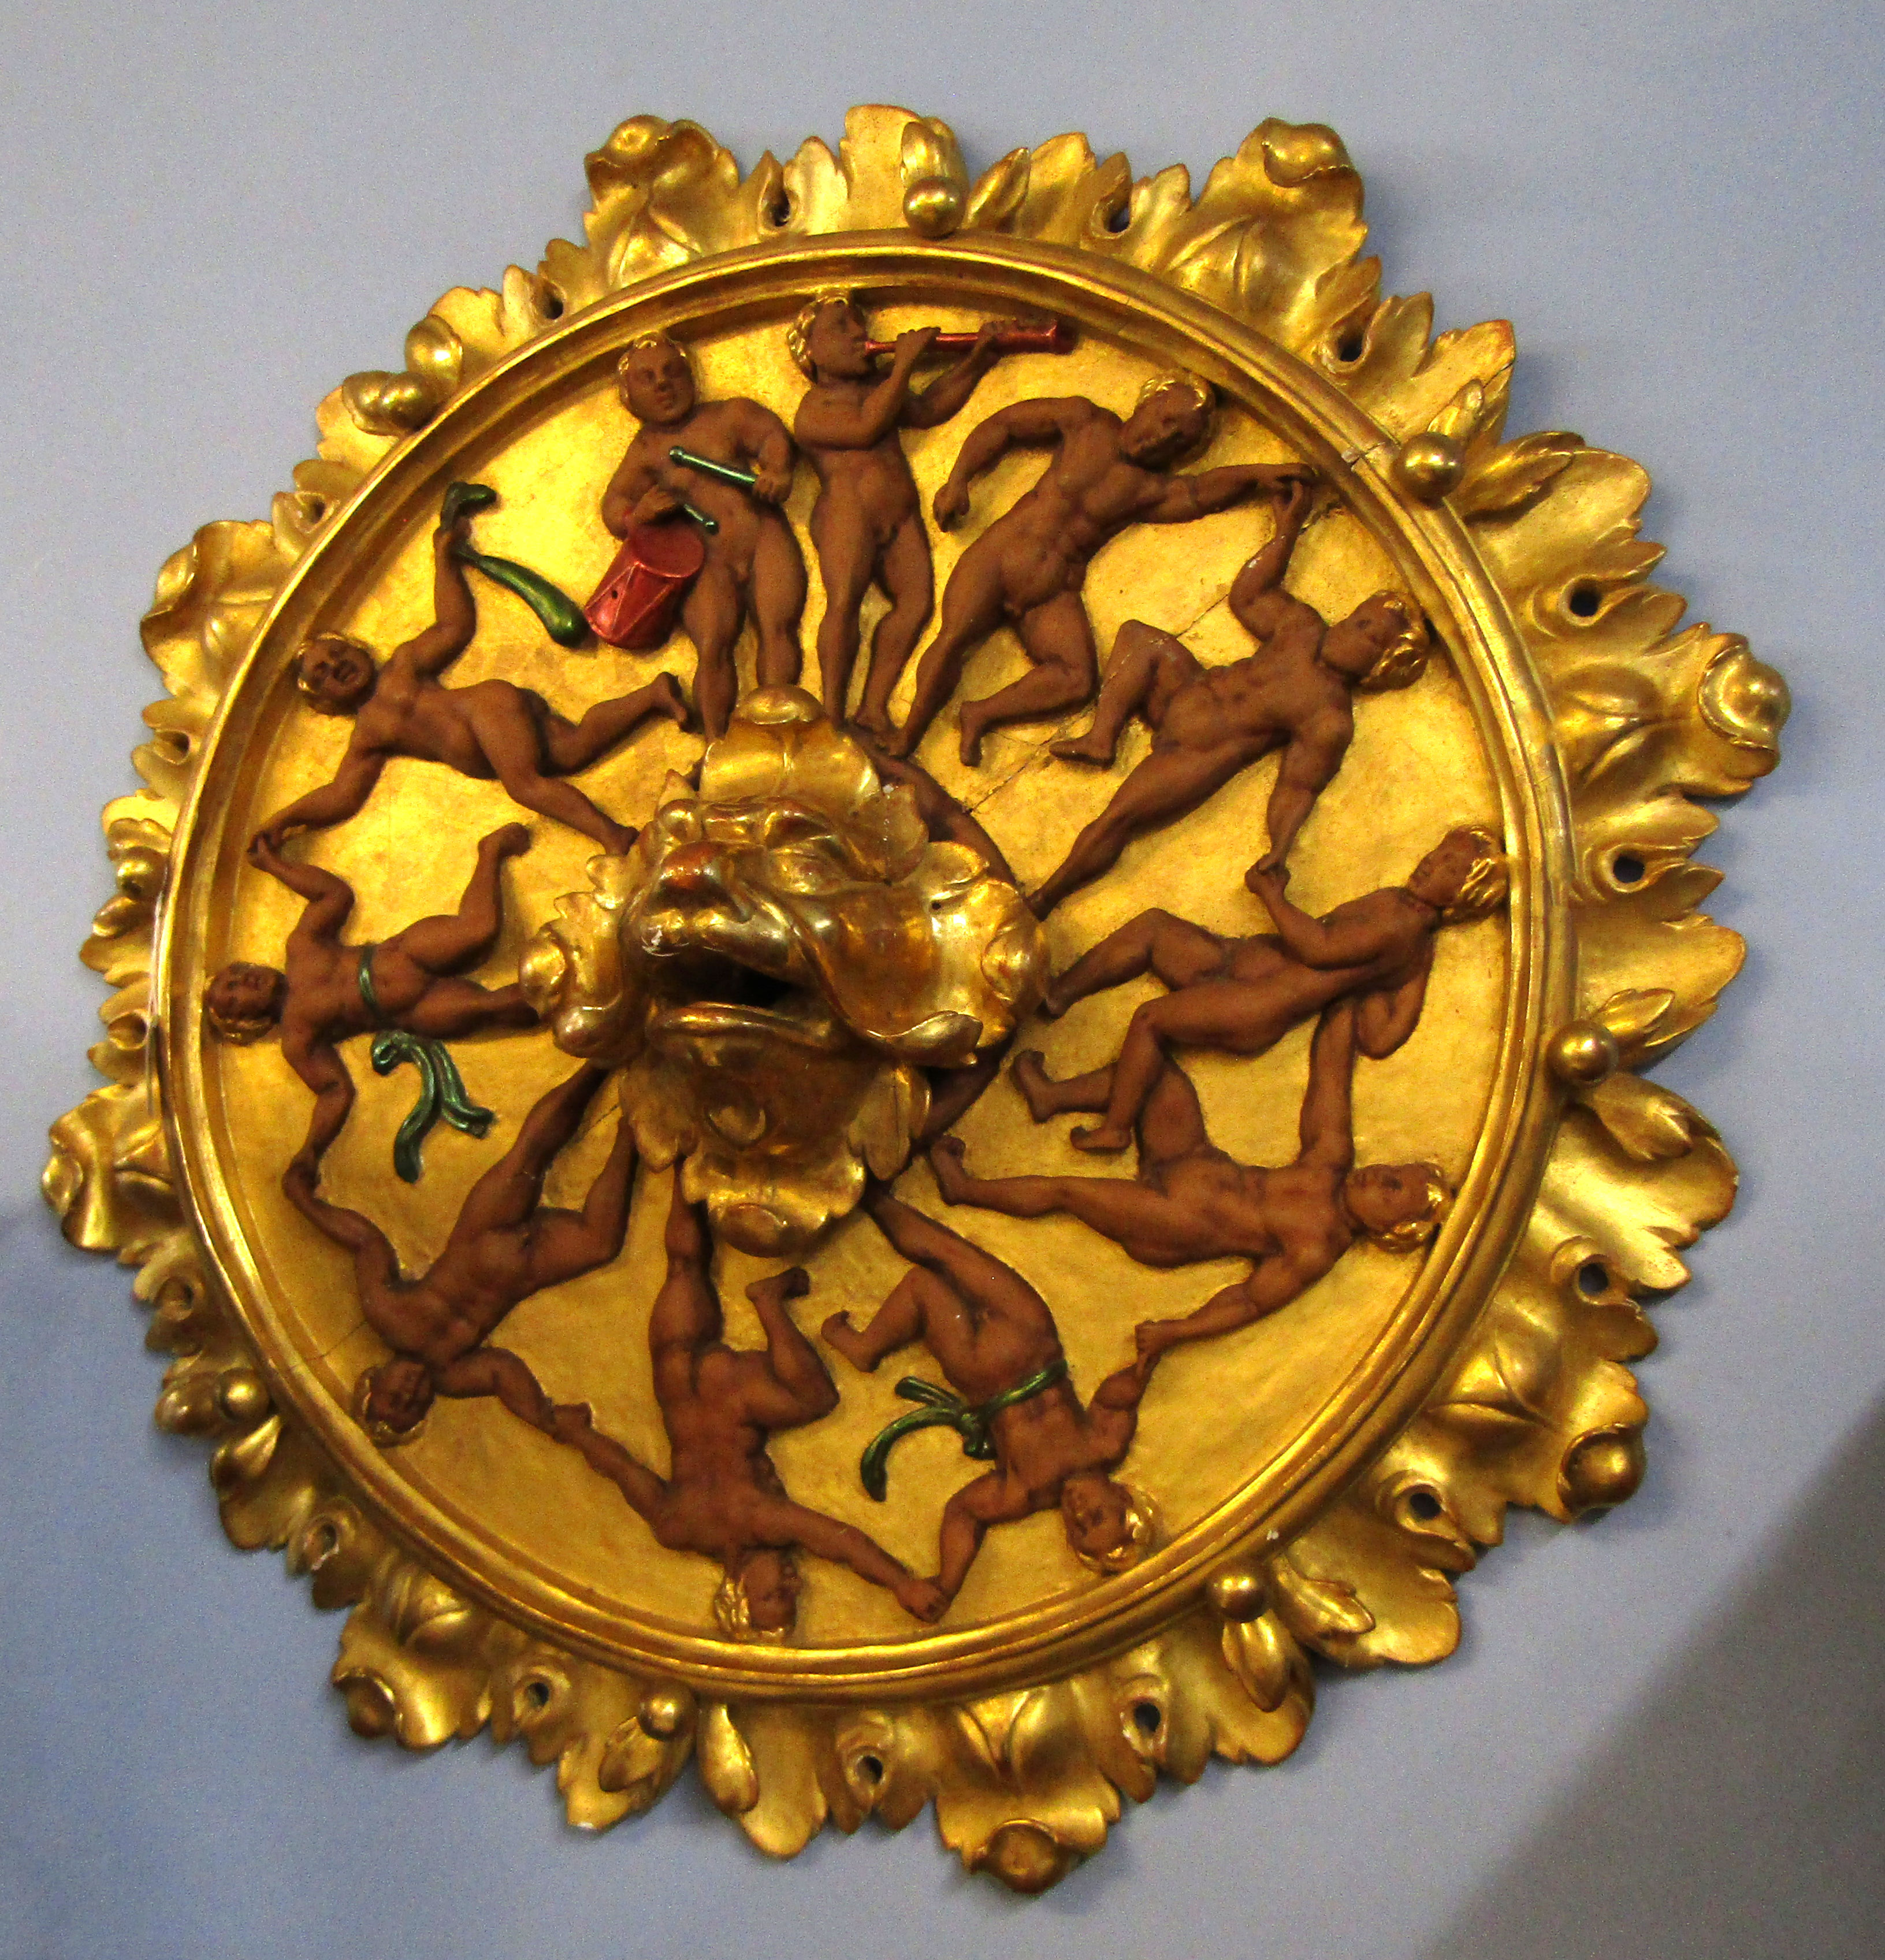 Ornate gilt wood and gesso ceiling boss with foliate and ball moulded surround, central griffon mask